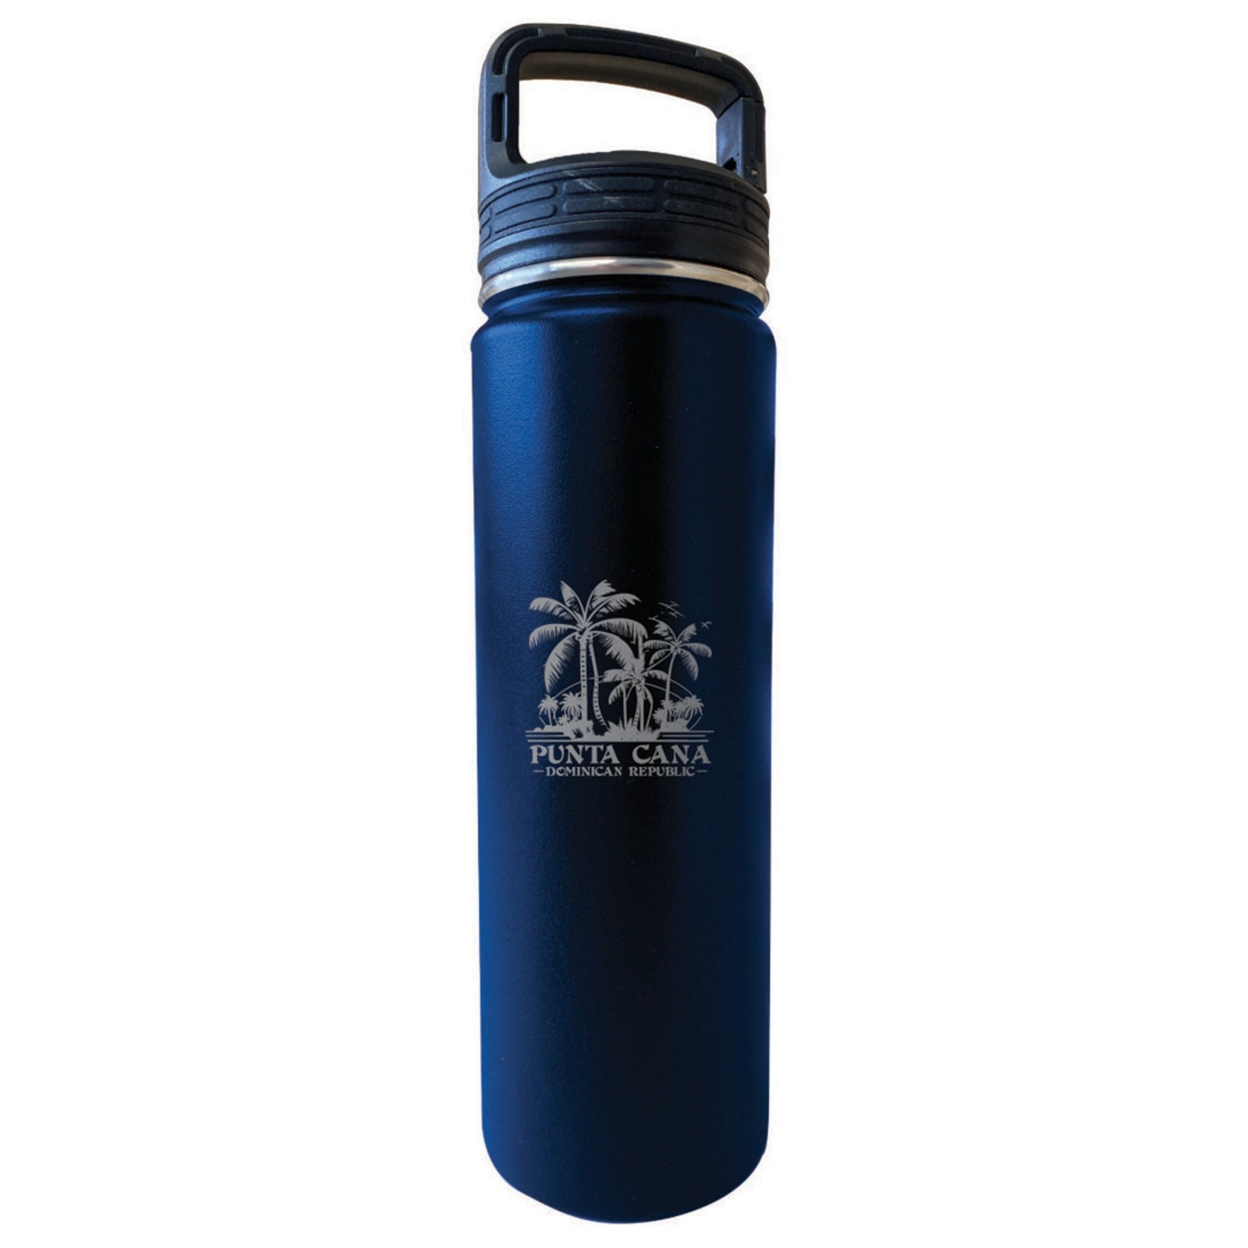 Punta Cana Dominican Republic Souvenir 32 Oz Insulated Stainless Steel Tumbler - Navy, Palm 2